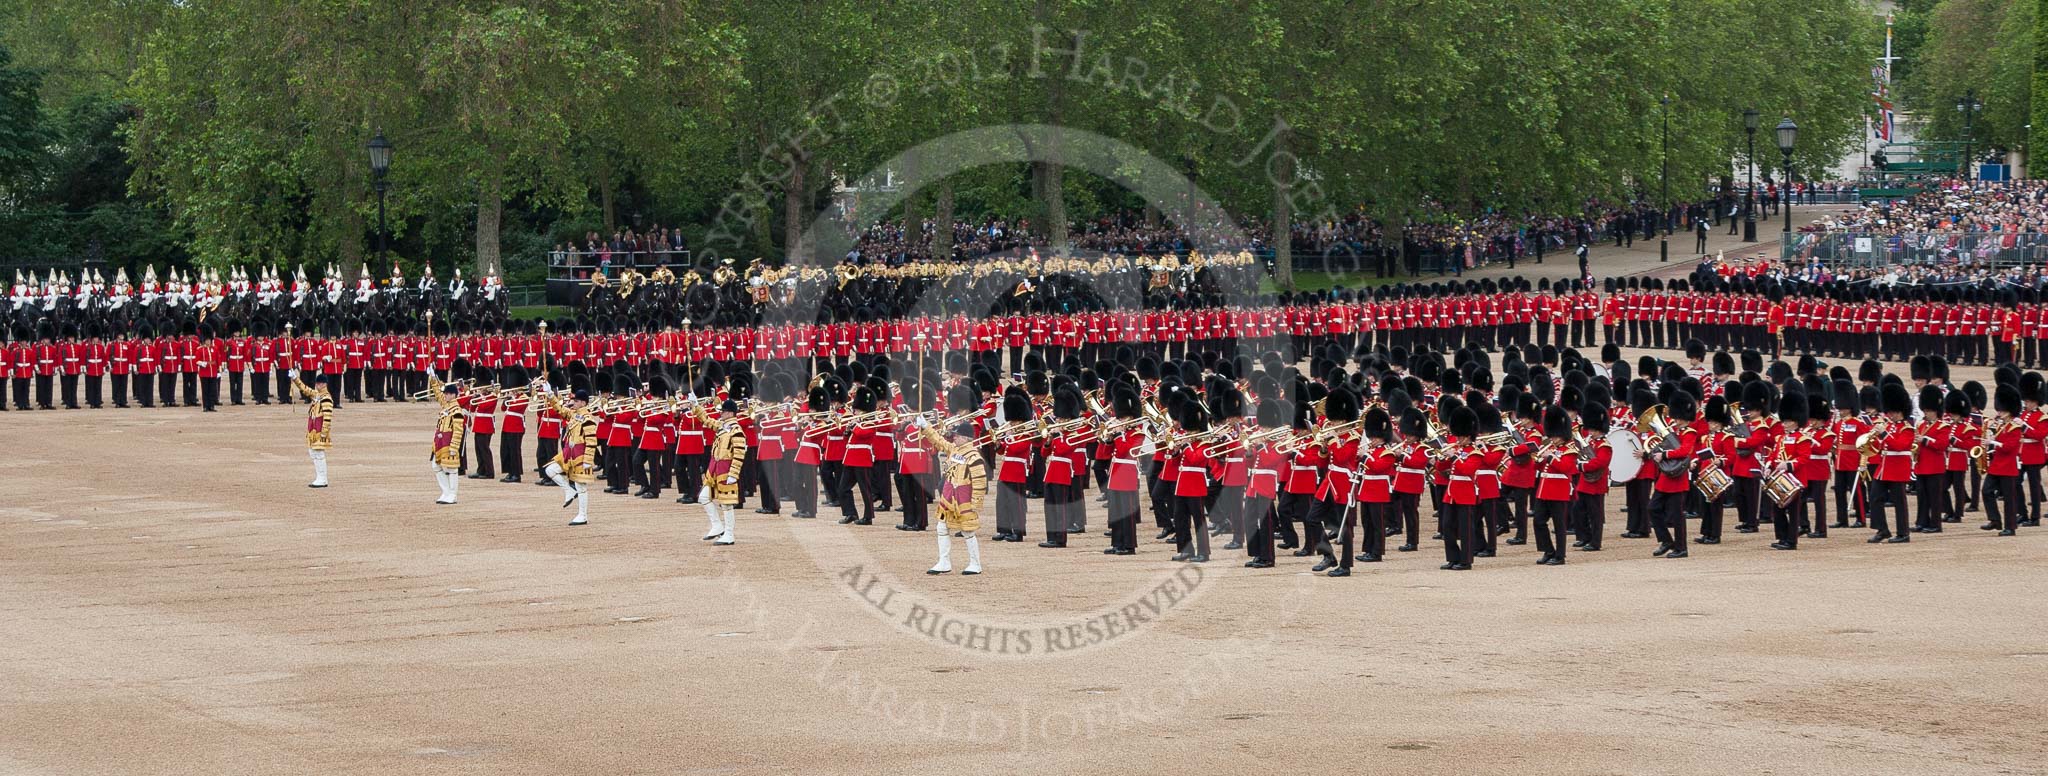 Trooping the Colour 2012: The Massed Bands playing during the Massed Bands Troop..
Horse Guards Parade, Westminster,
London SW1,

United Kingdom,
on 16 June 2012 at 11:12, image #271